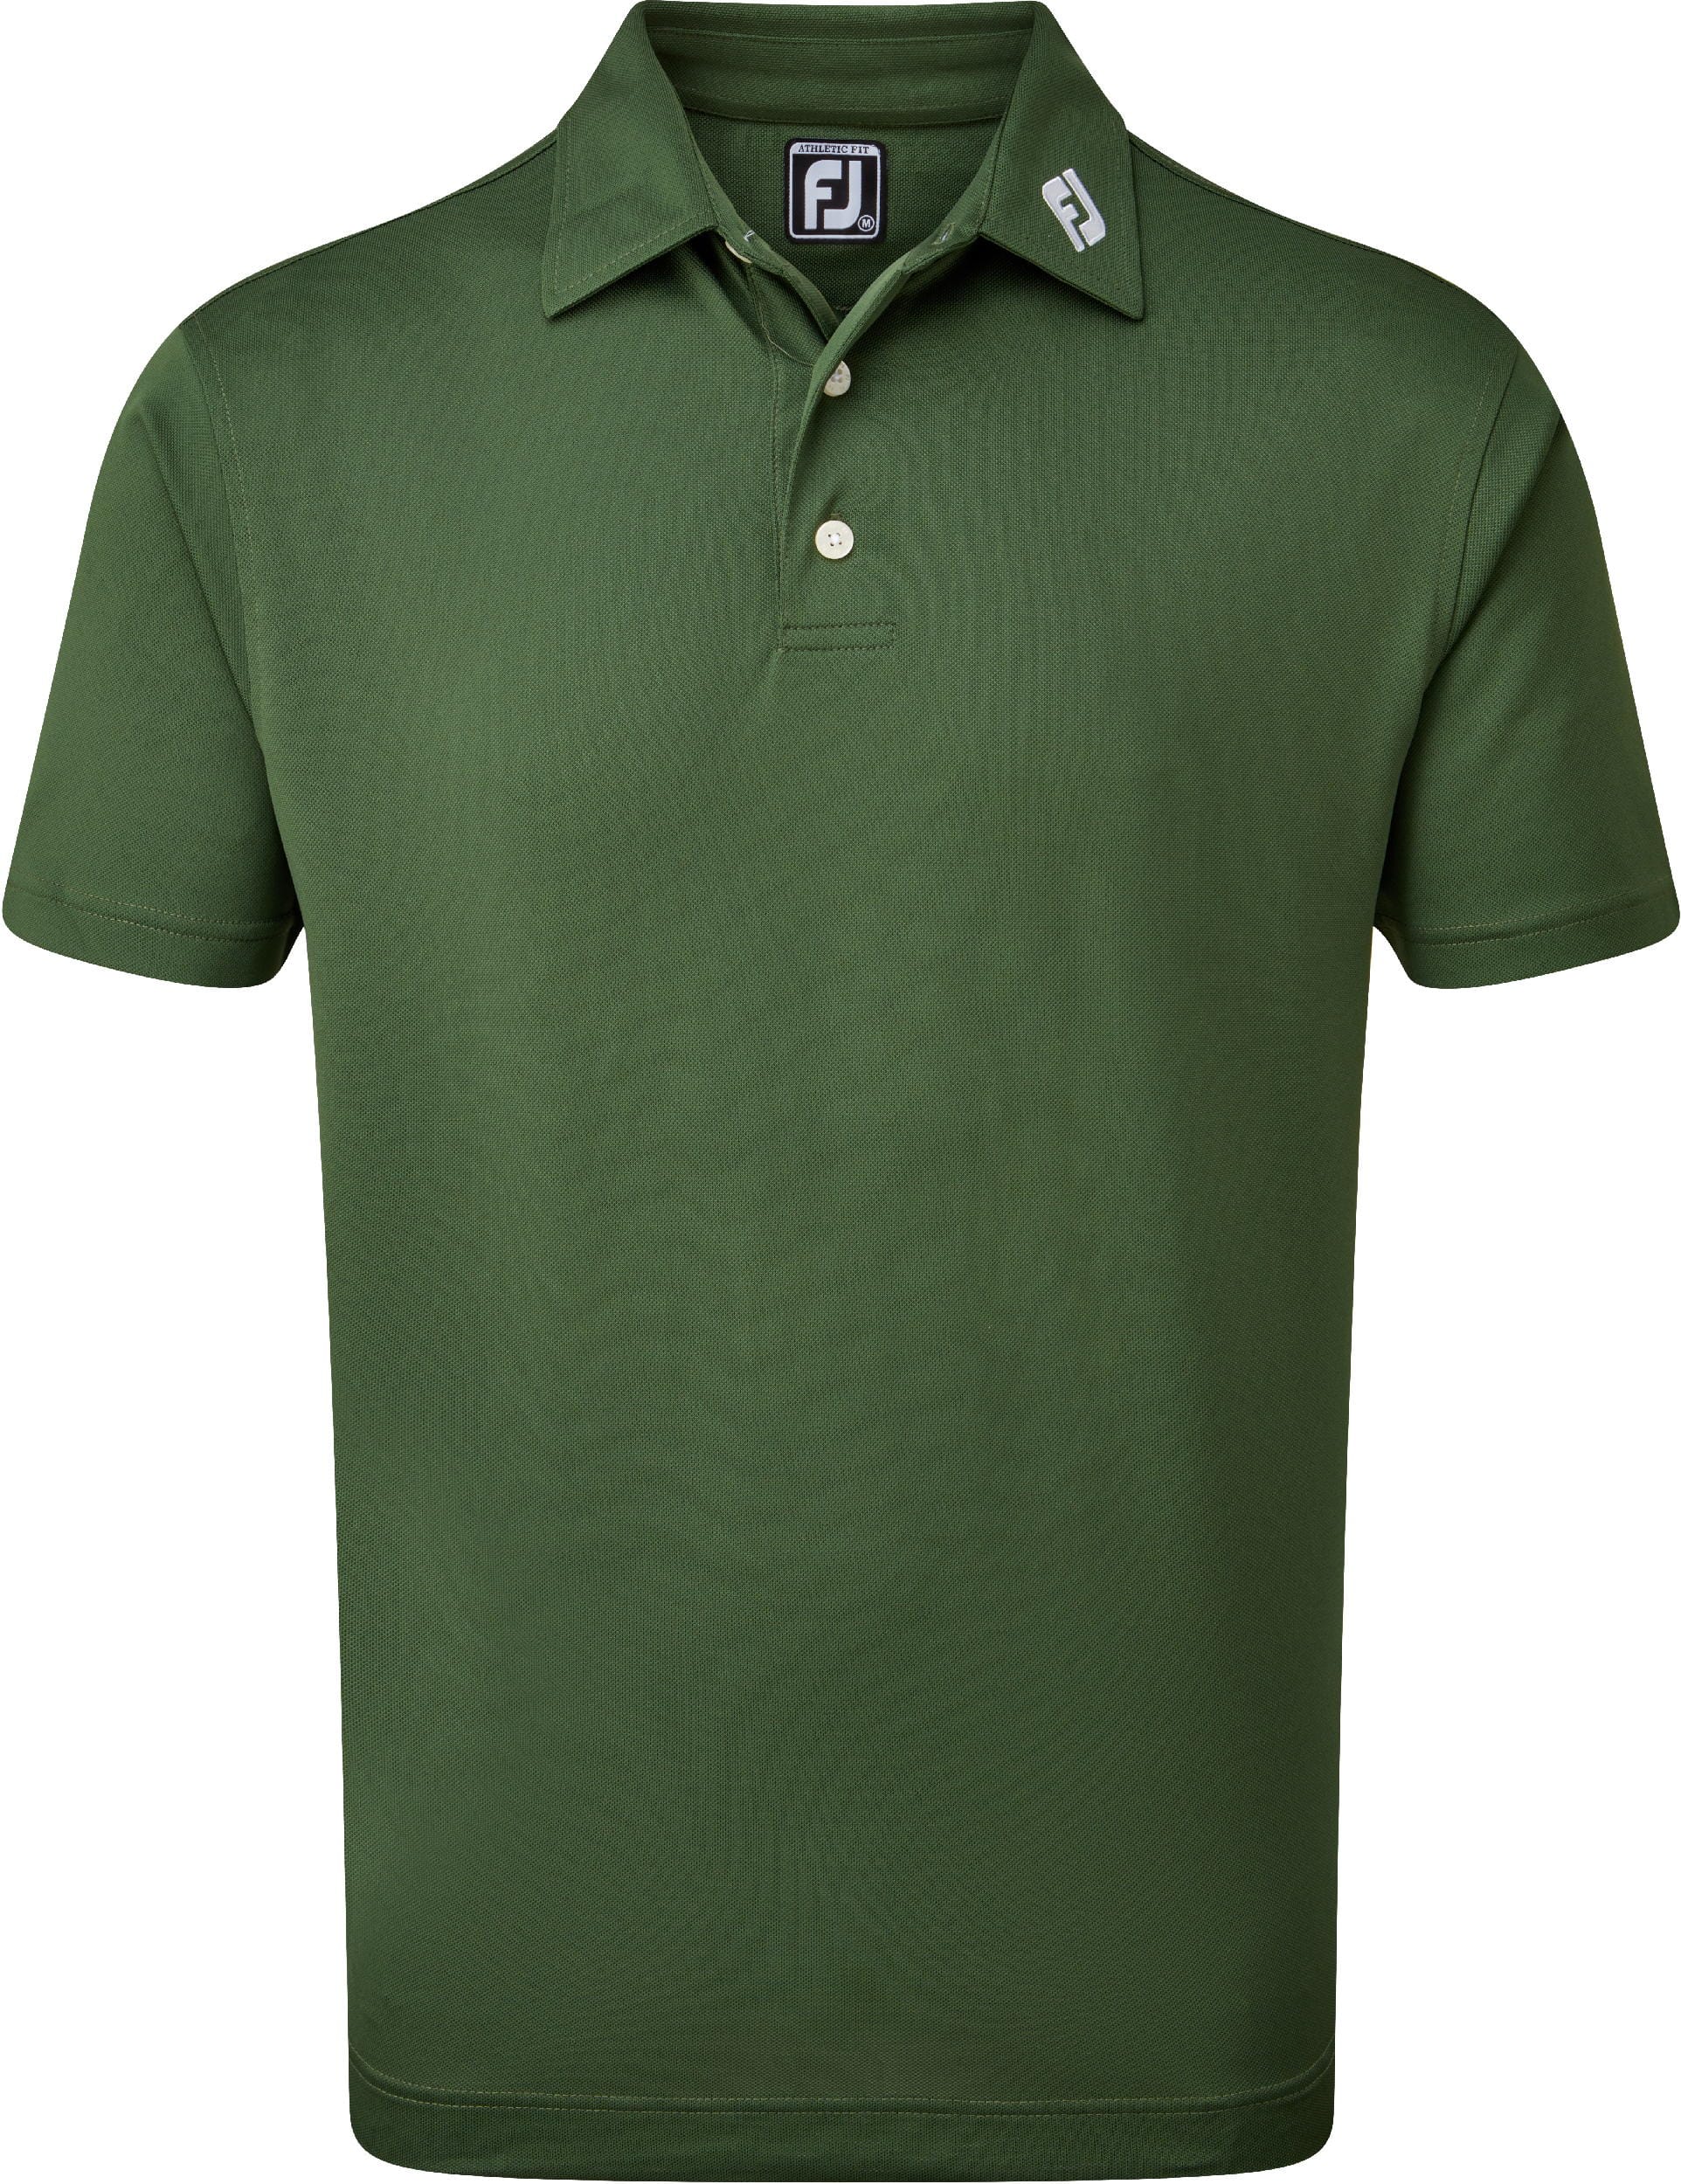 FootJoy Strech Pique Solid Polo, olive